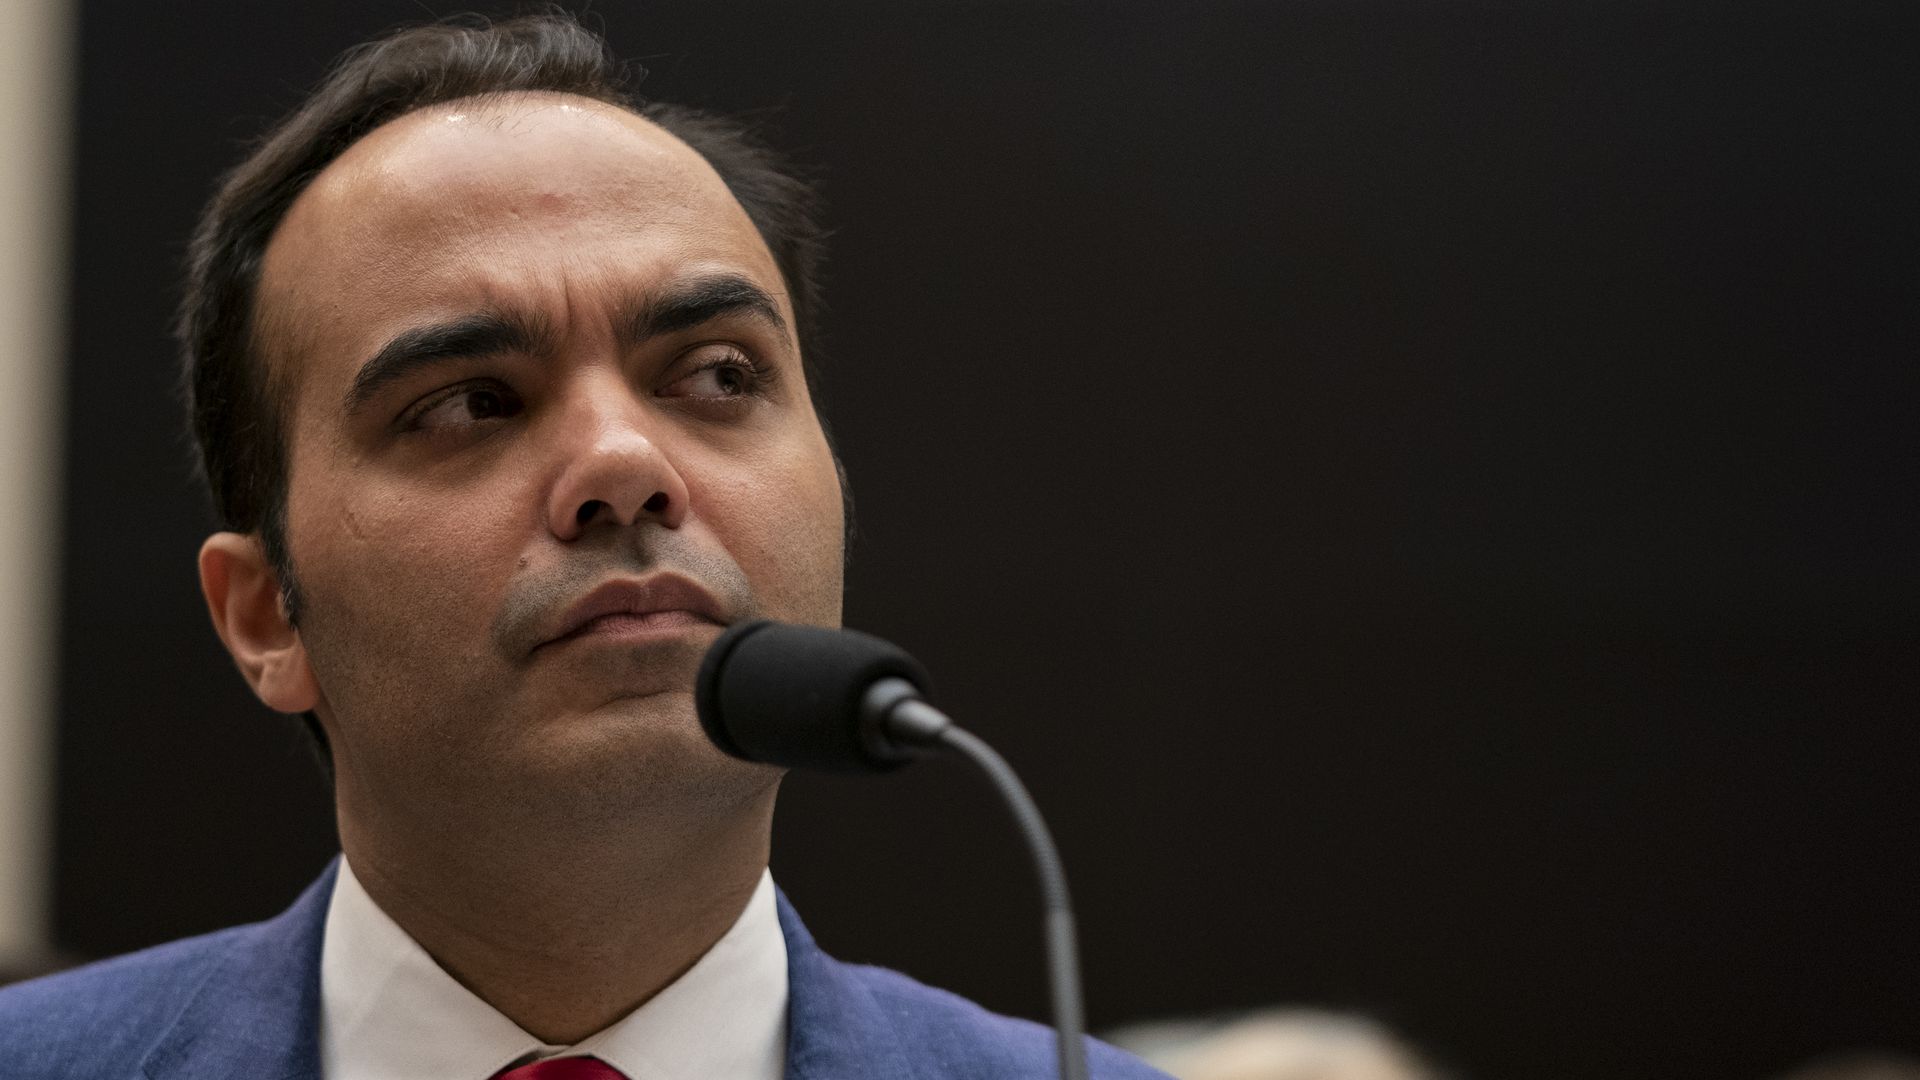 Rohit Chopra, commissioner at the Federal Trade Commission (FTC), listens during a House Judiciary committee hearing on Capitol Hill in Washington, D.C., U.S., on Friday, Oct. 18, 2019. 